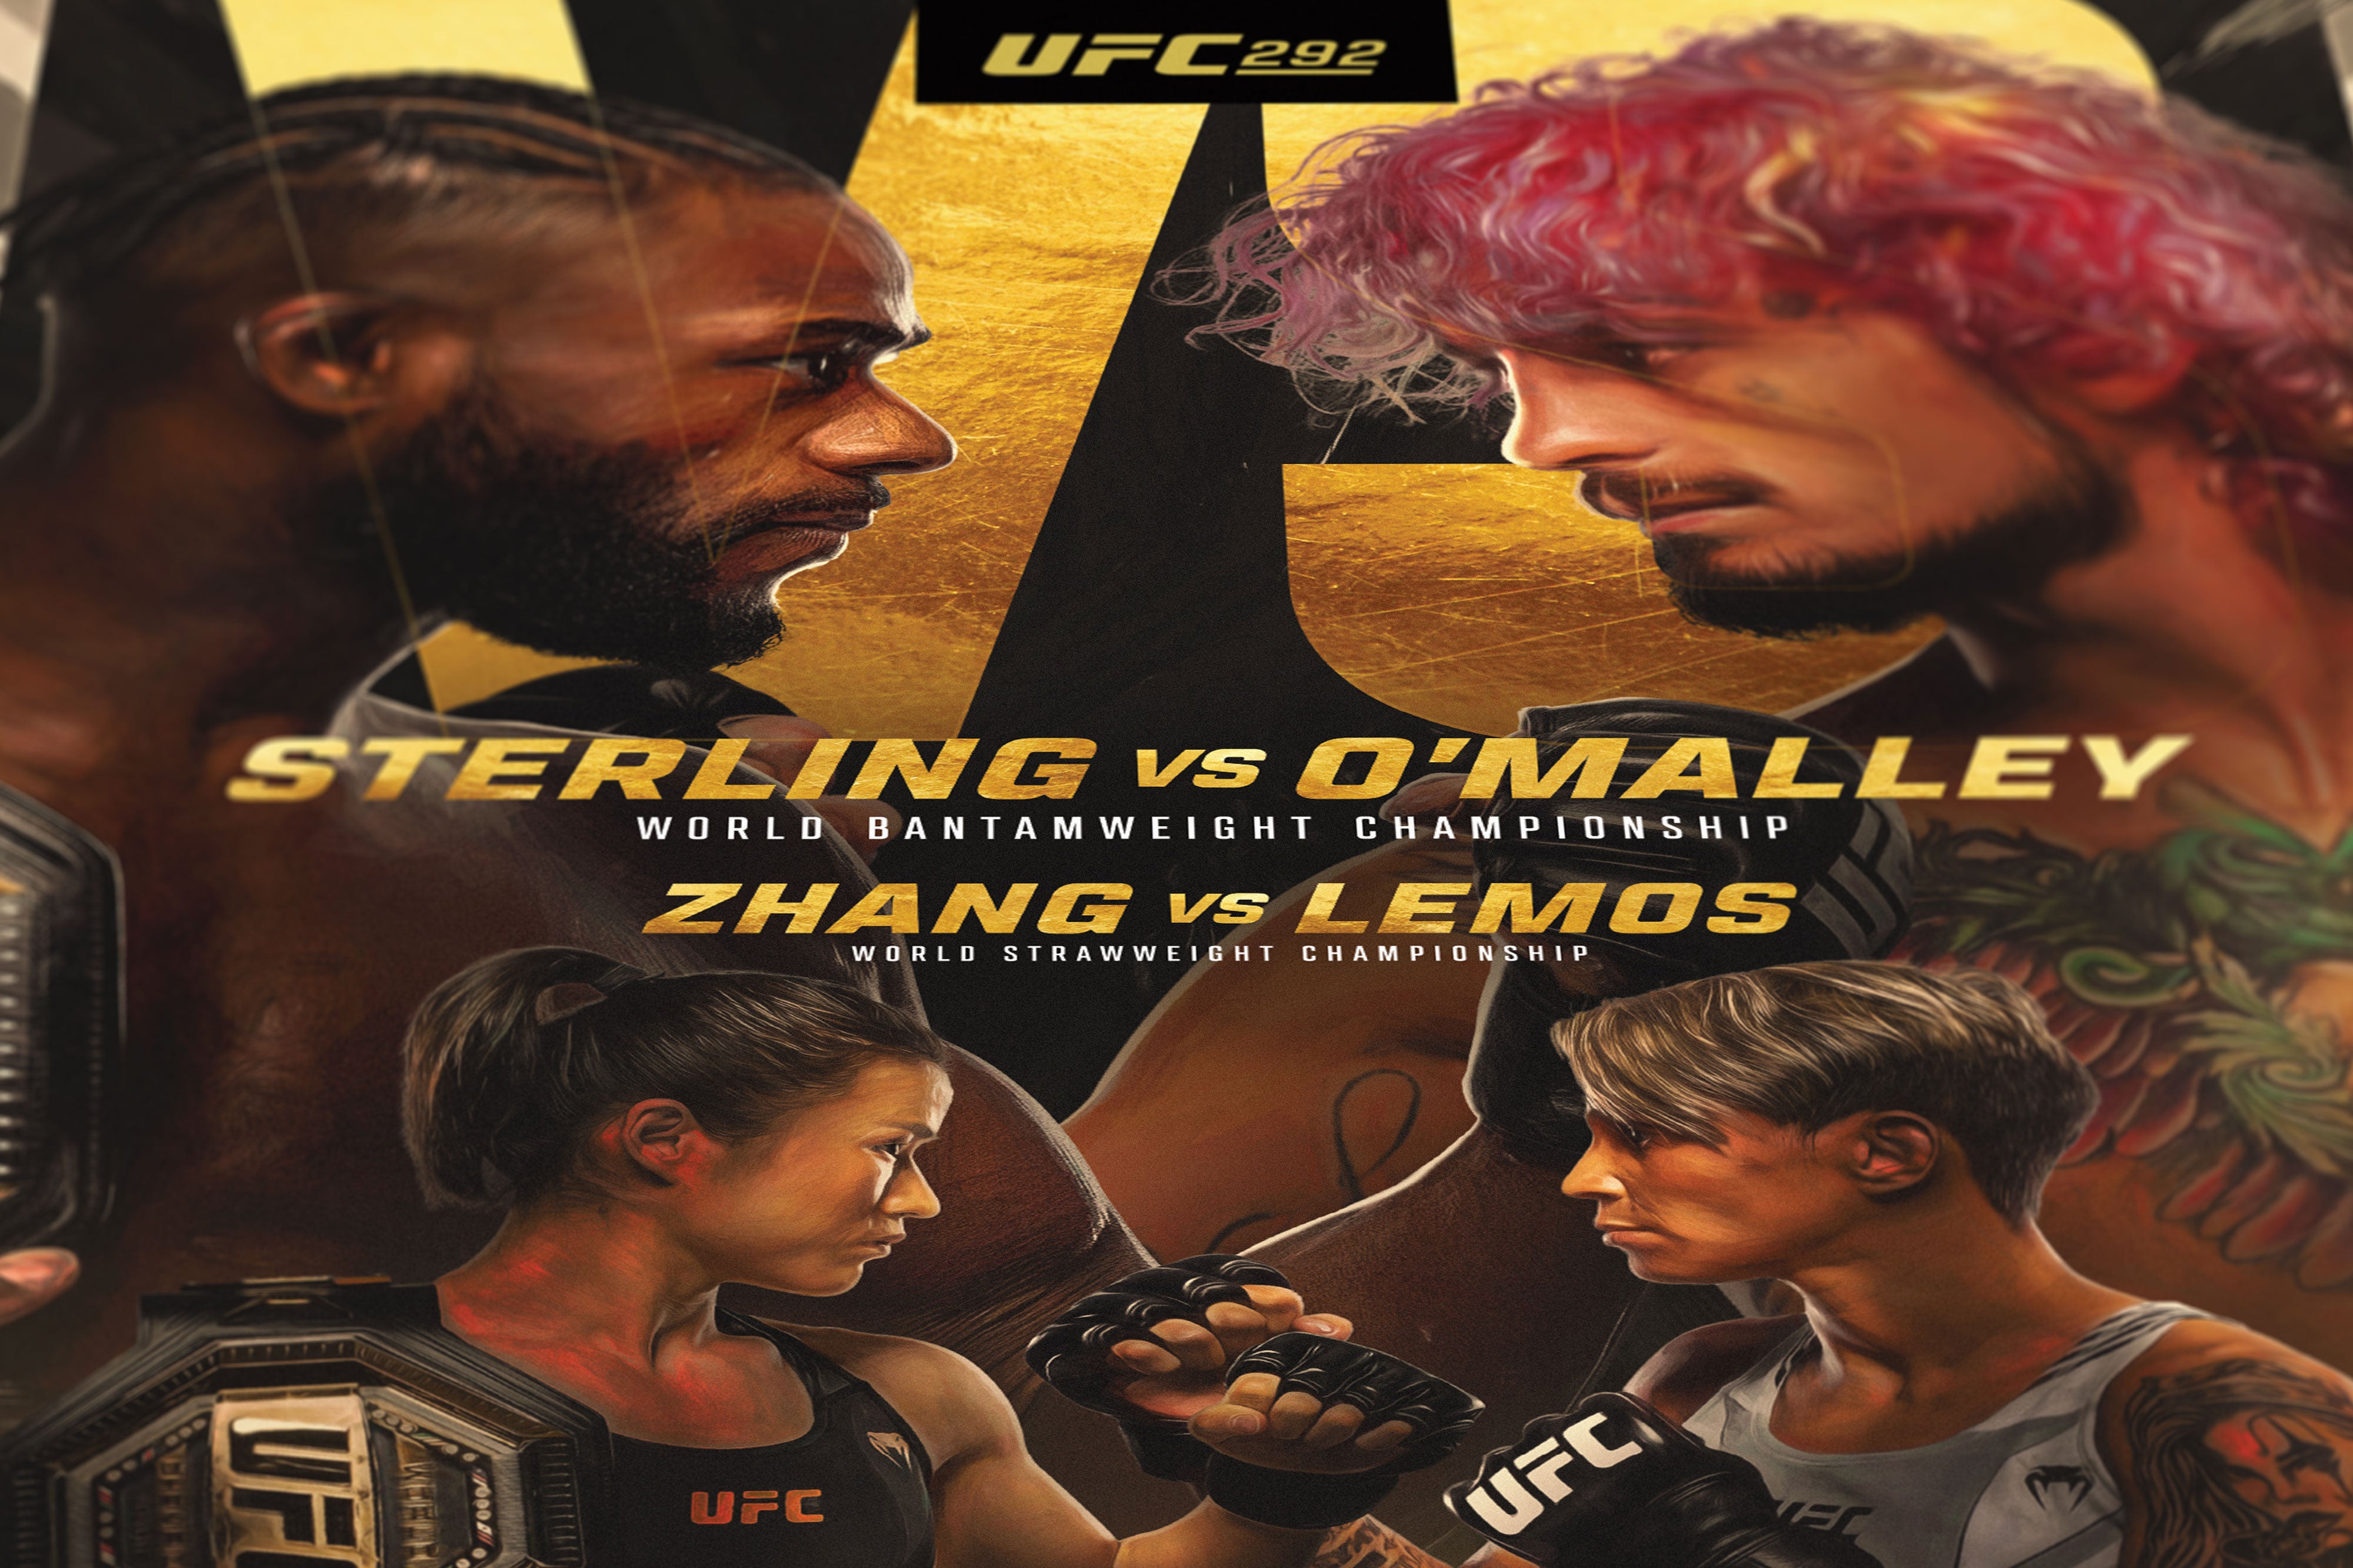 UFC 292: Sterling vs O'Malley Autographed Event Poster